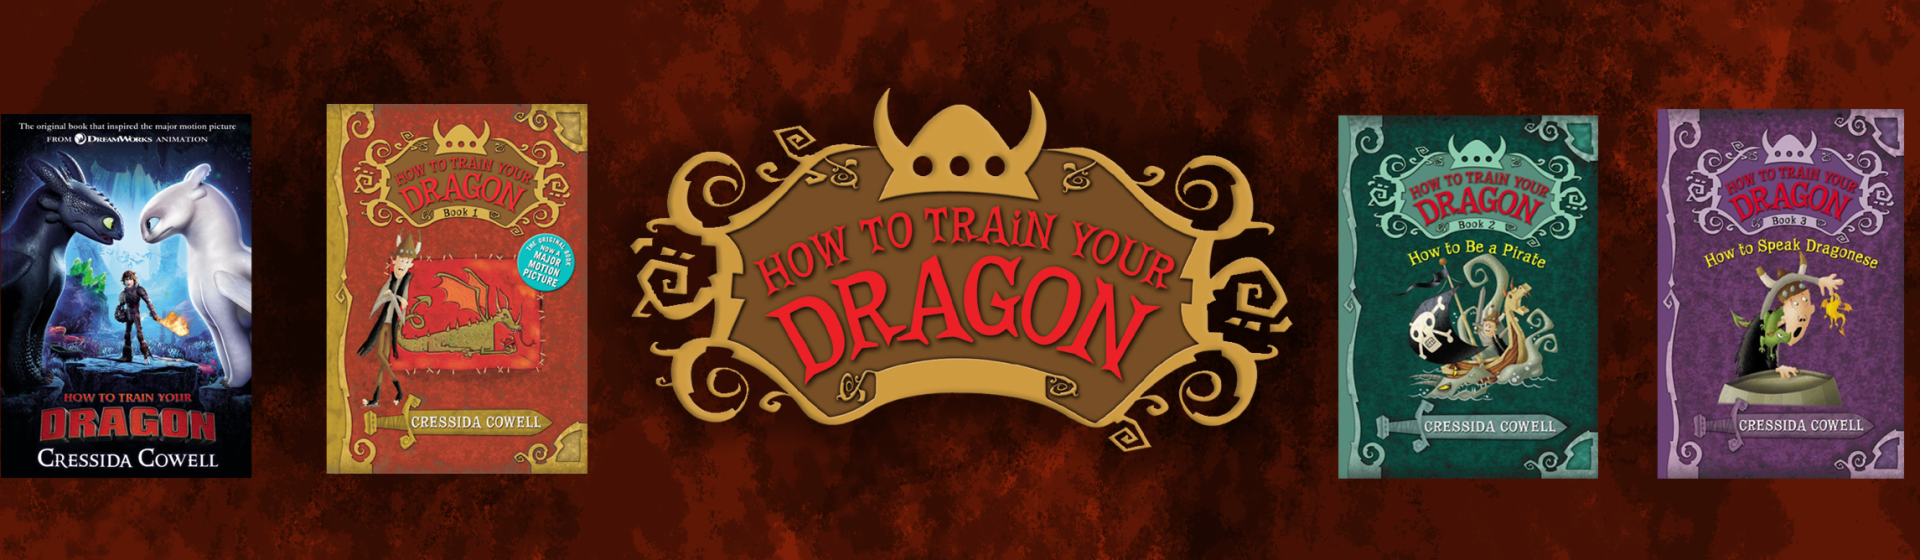 https://www.hachettebookgroup.com/wp-content/uploads/2019/01/HOW-TO-TRAIN-YOUR-DRAGON-WEBSITE-BANNER1.png?w=1920&h=560&crop=1